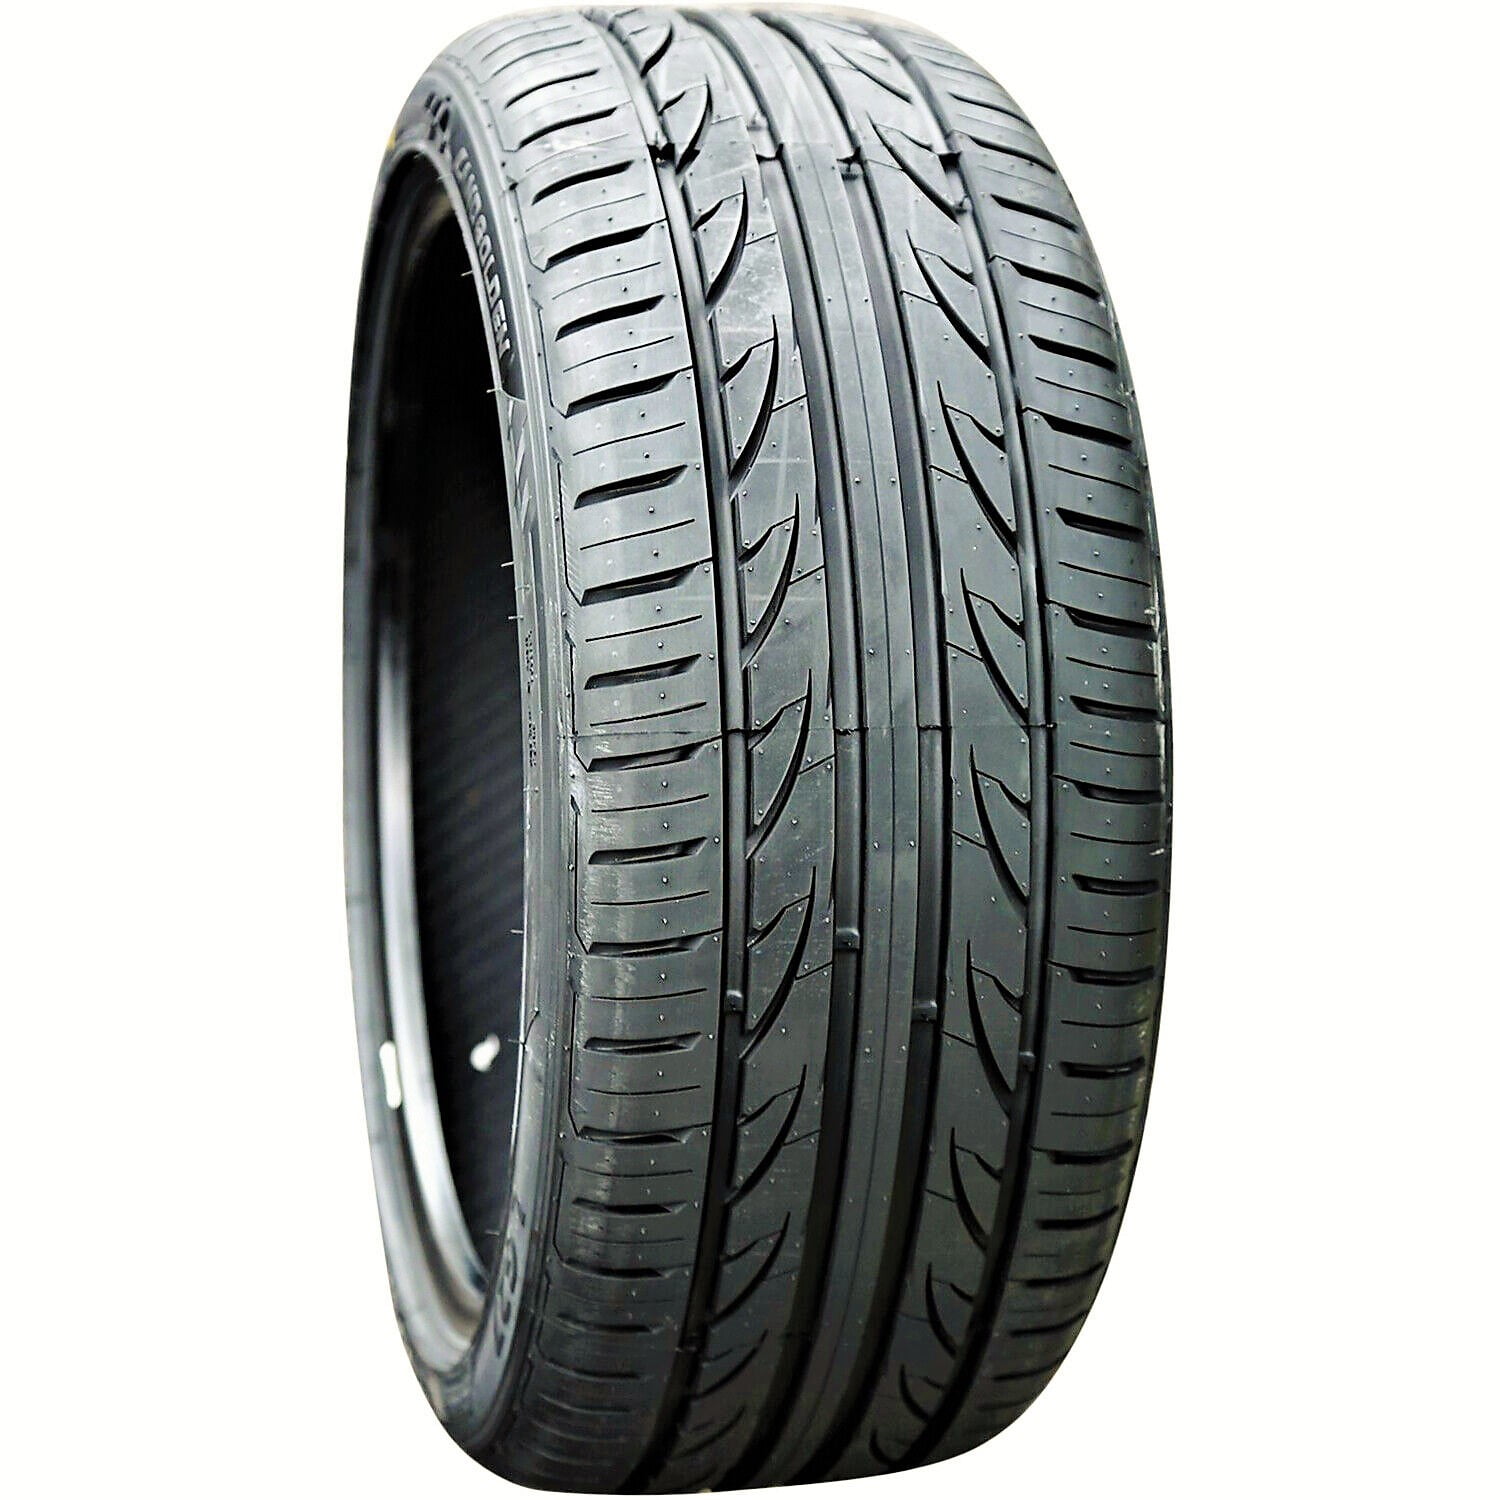 Ford Tire 255/40ZR19 Mustang GT, Fits: Dunlop Maxx 2014 100Y 2015-23 EcoBoost Sport Rt2 Premium Performance Mustang Ford